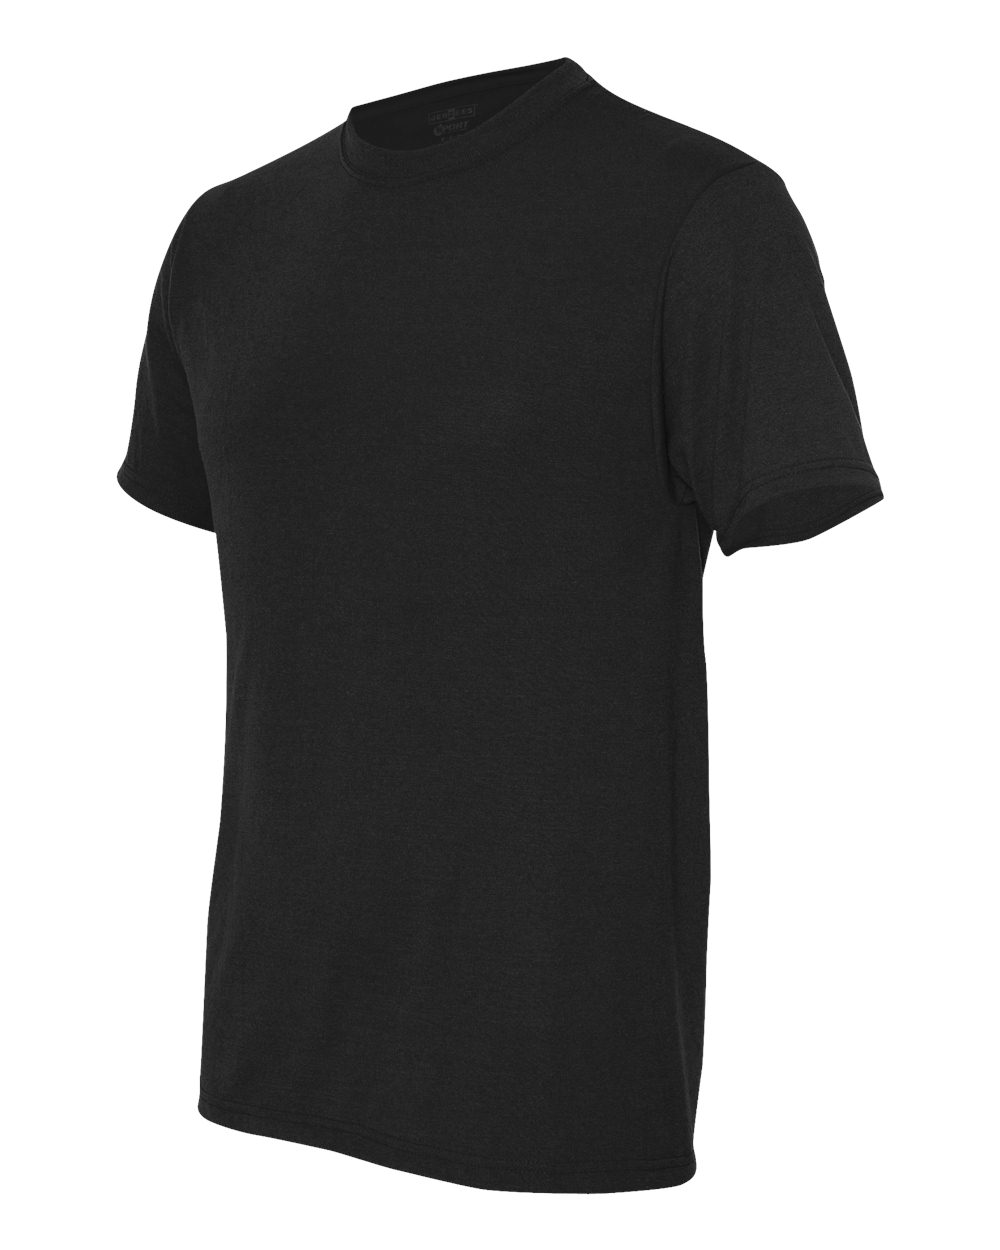 fully customizable jerzees dri-power performance short sleeve tee shirt in multiple sizes and colors